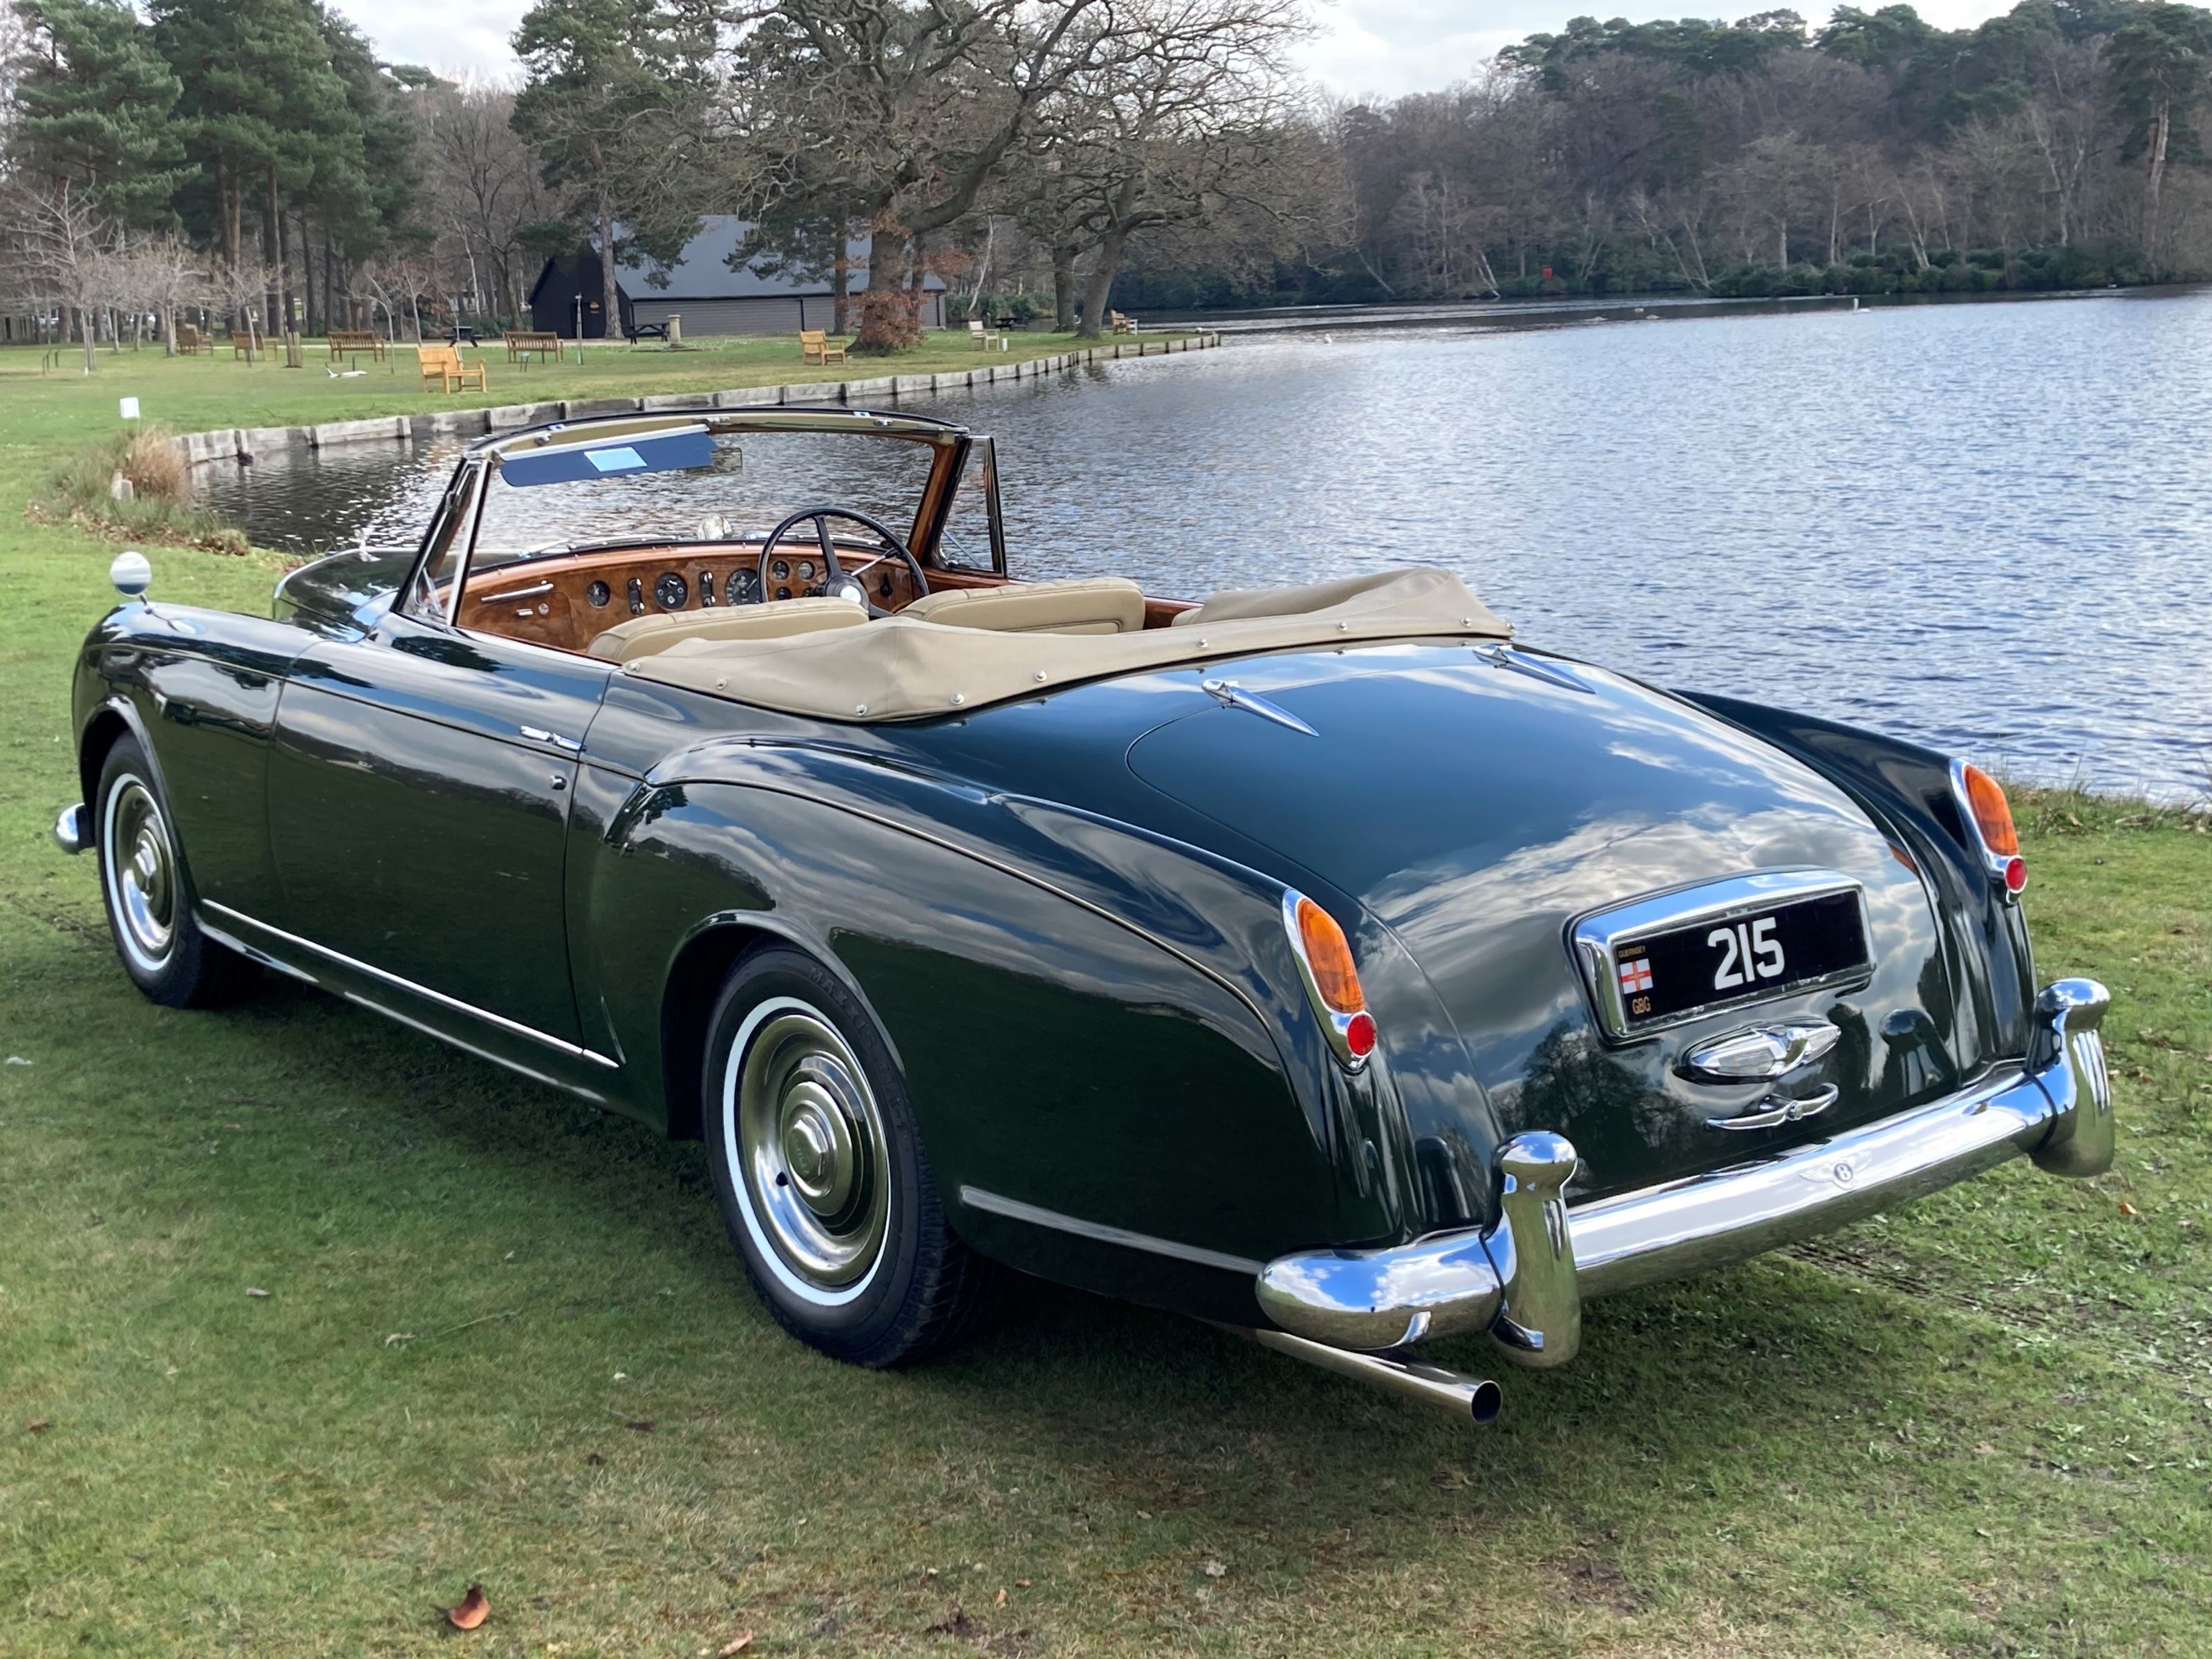 Bentley s1 continental  likelc6hqbhqs9n 6xciw